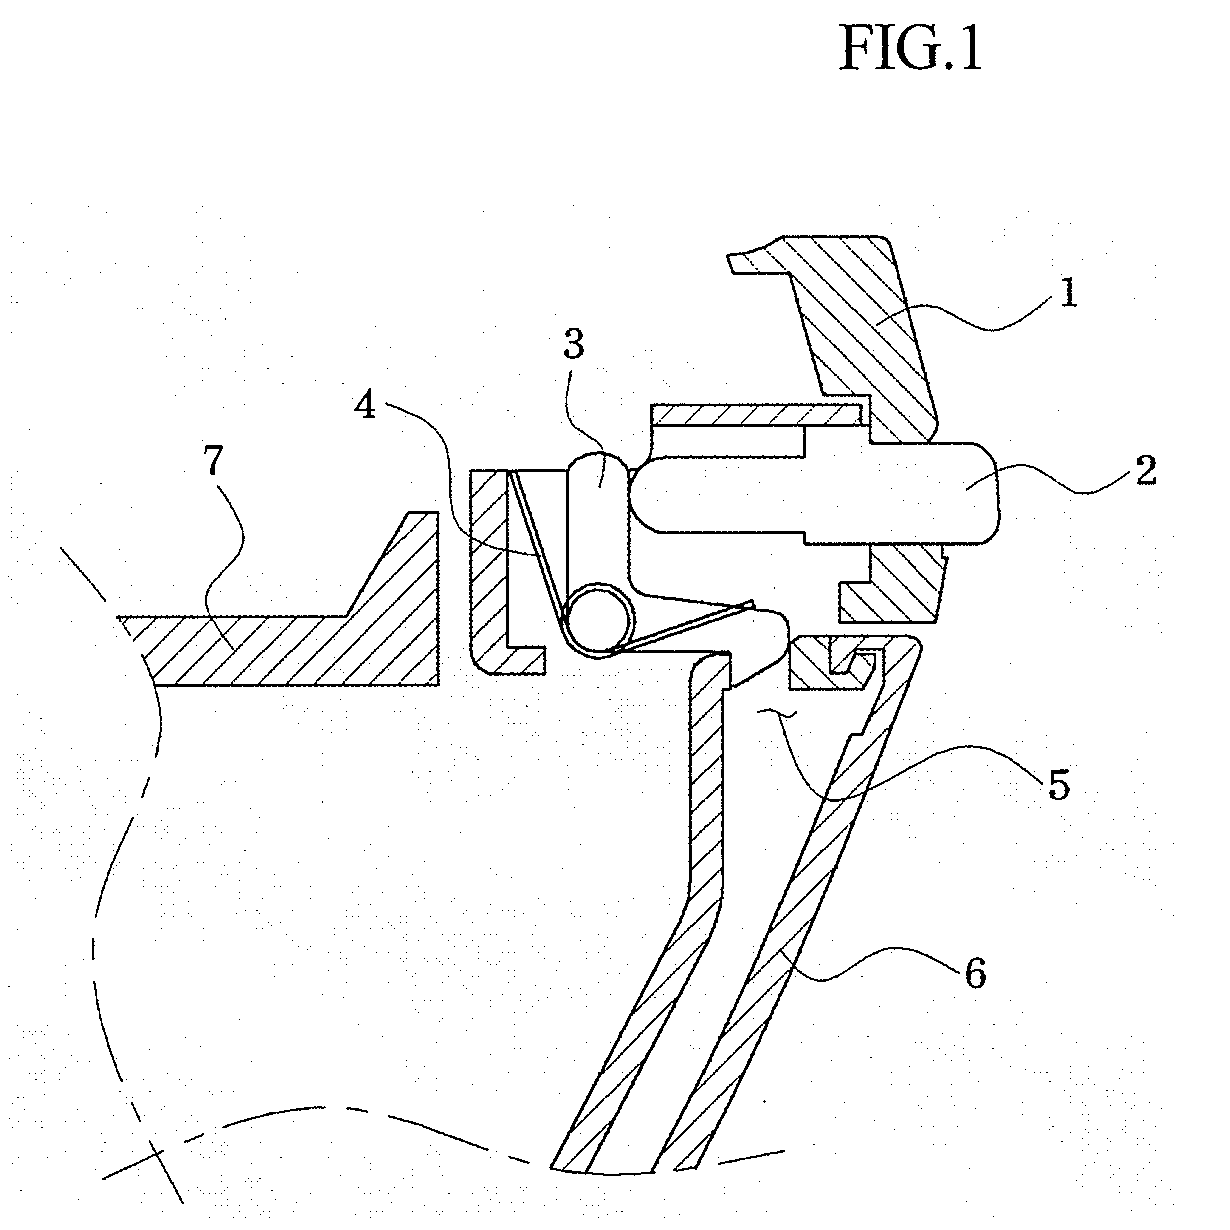 Locking device for automobile tray